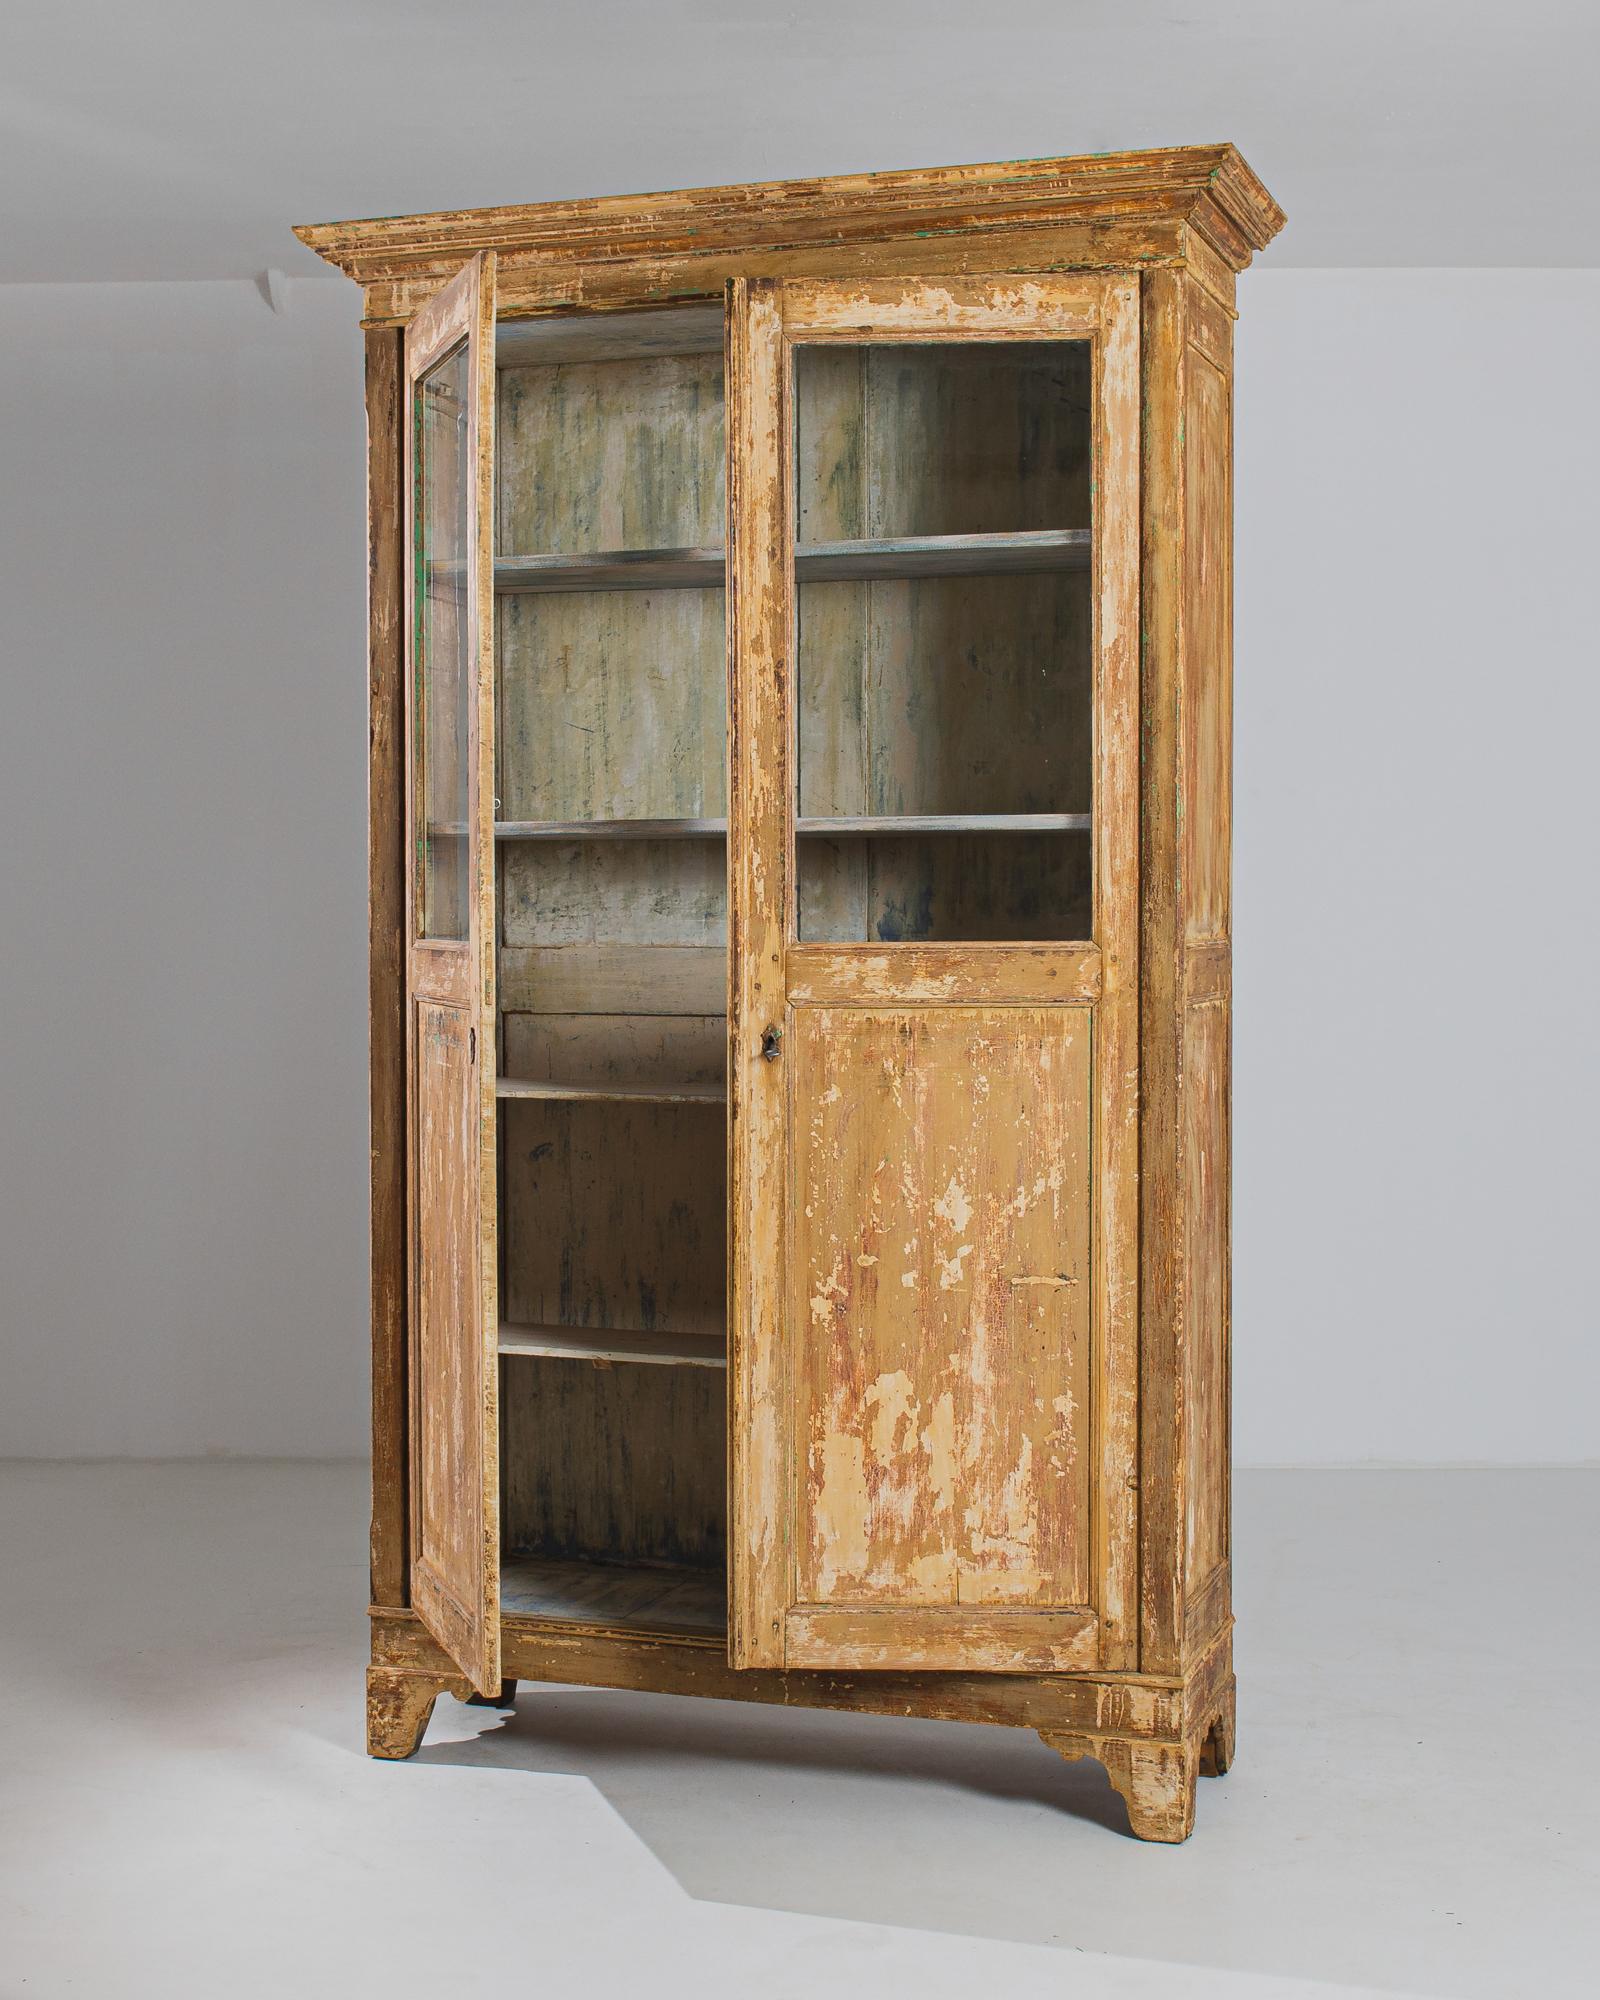 The 1880s French Wood Patinated Vitrine is a stunning piece that exudes timeless charm with its unique features. Adorned with a rich brown patina, the two doors open gracefully to reveal an enchanting interior. The top half of the doors is crafted